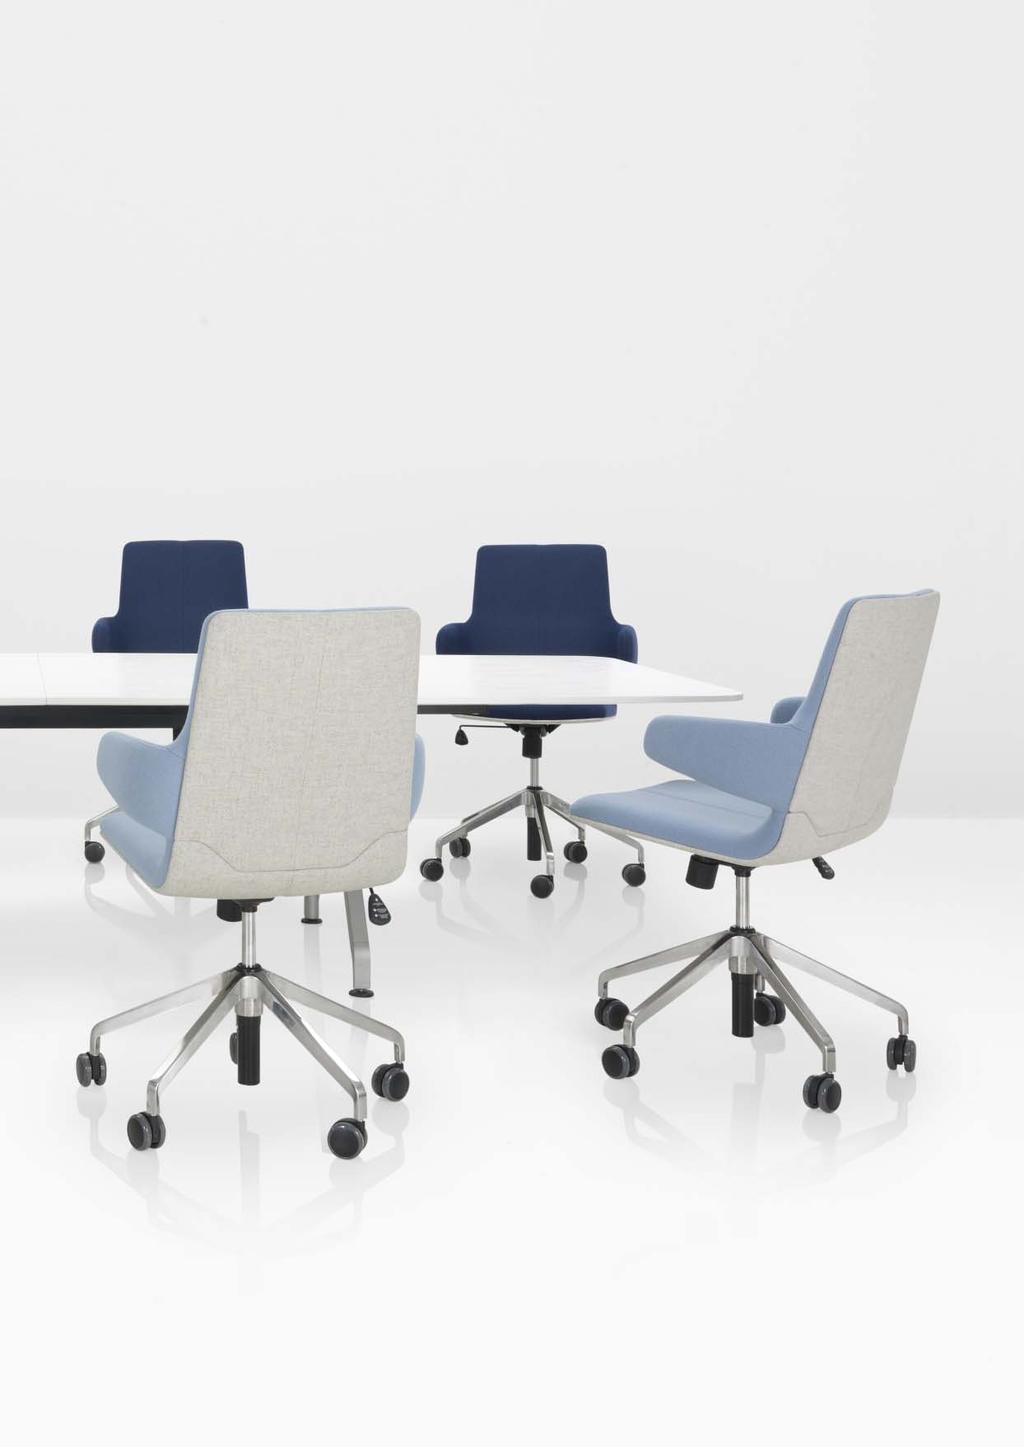 JET DESIGN PASI PÄNKÄLÄINEN JET is an elegant streamlined collection for meeting rooms; its design reminds us of the world of aviation.